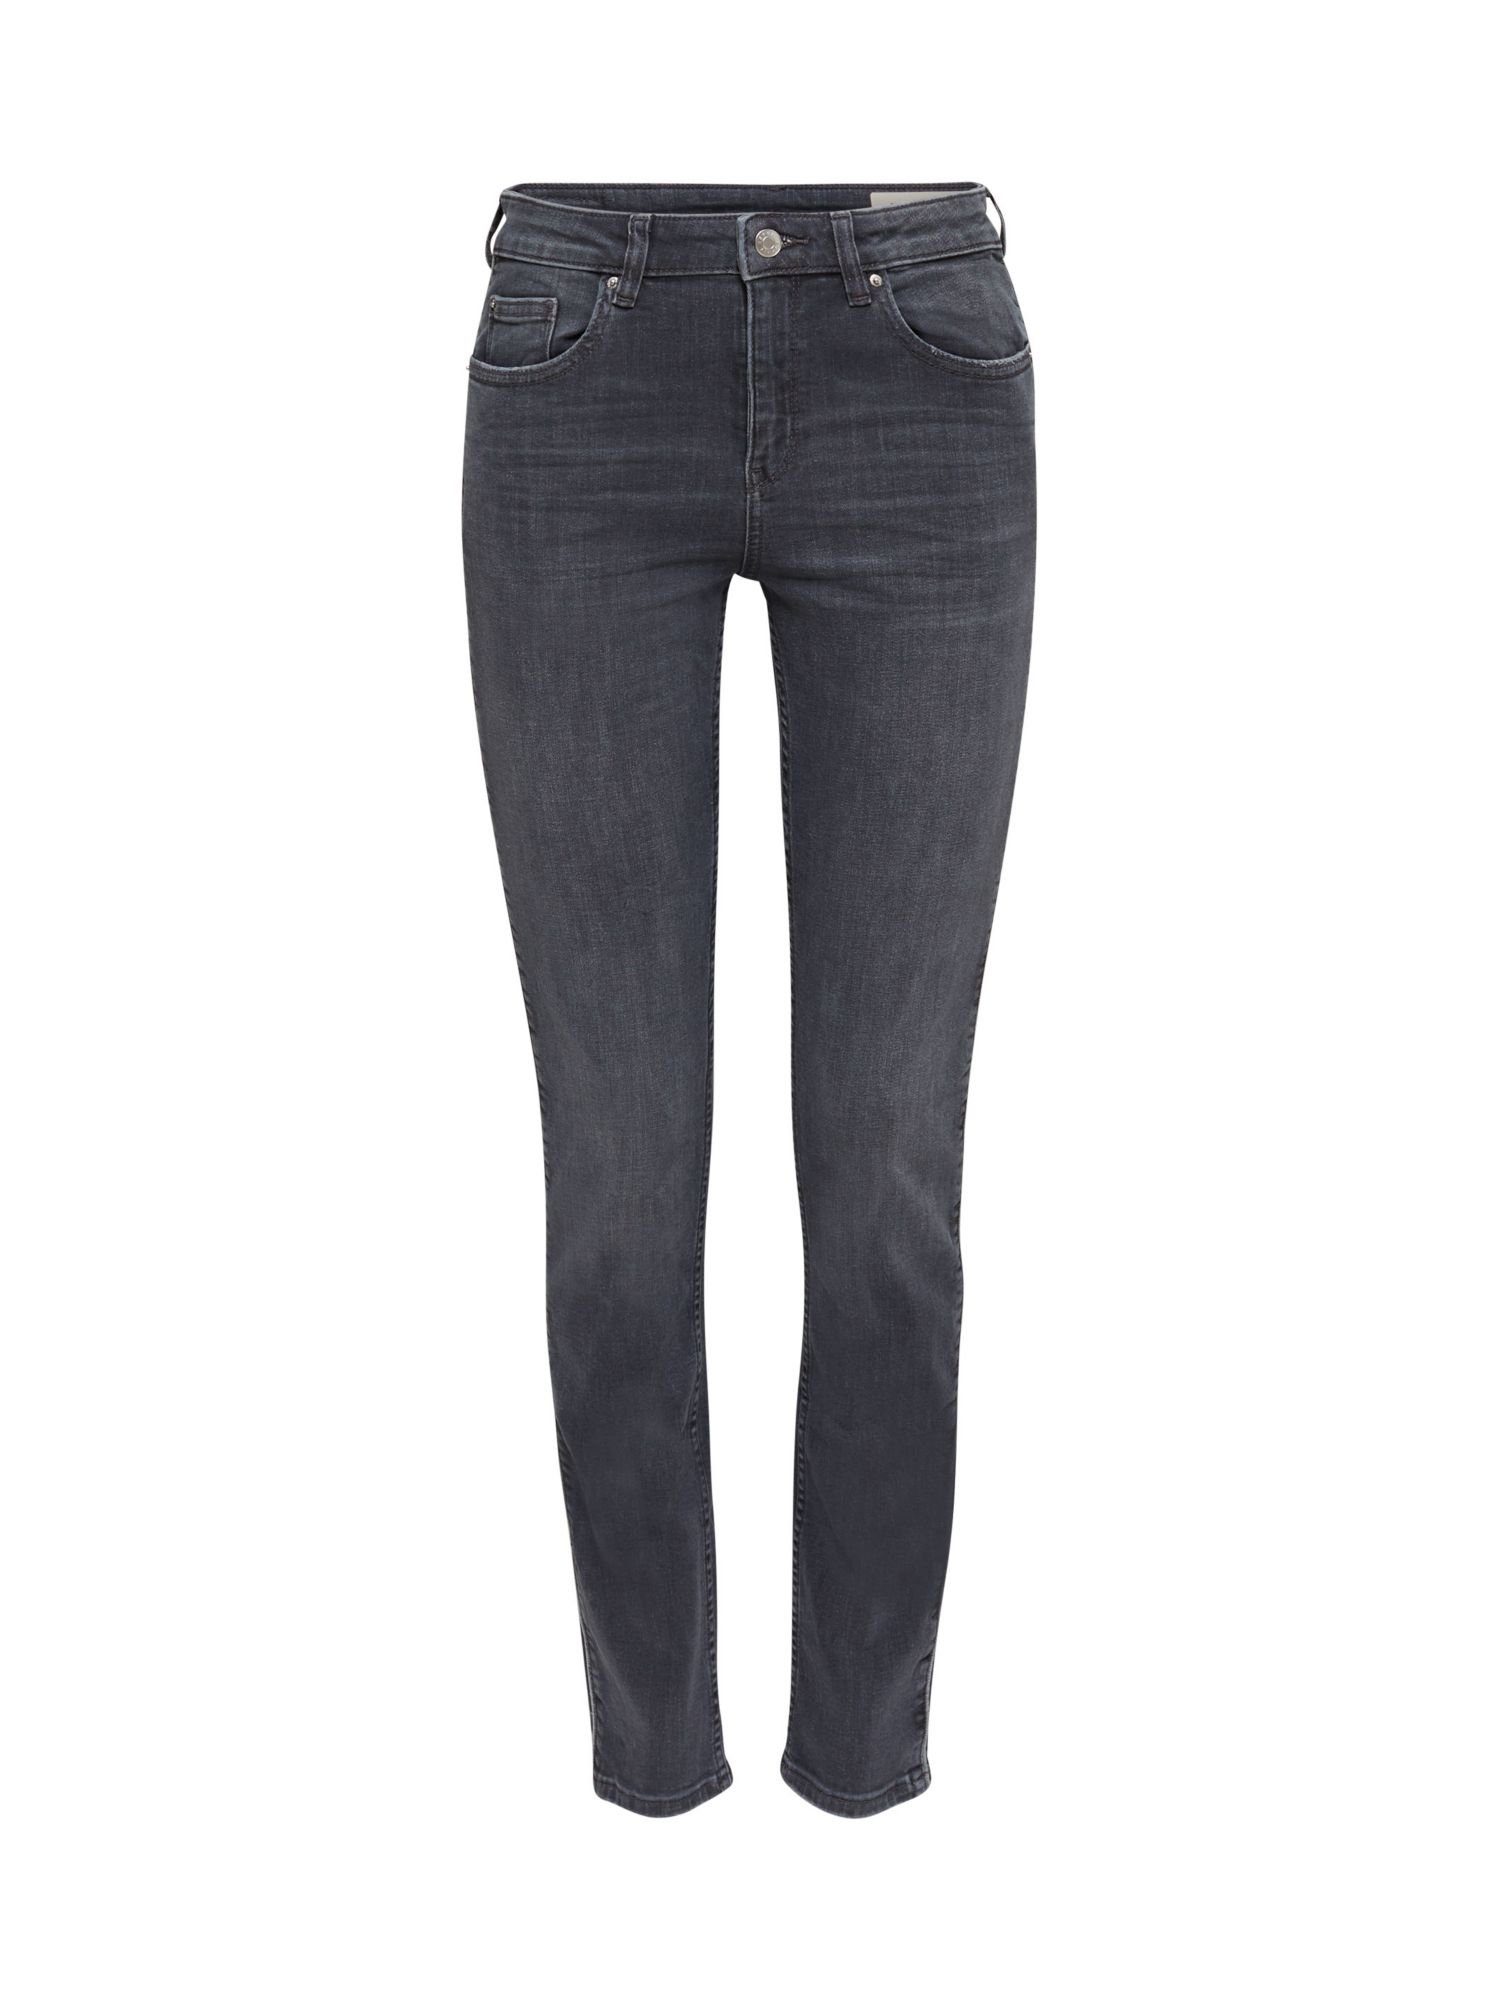 Esprit Slim-fit-Jeans »Graue Jeans mit Pipings« | OTTO